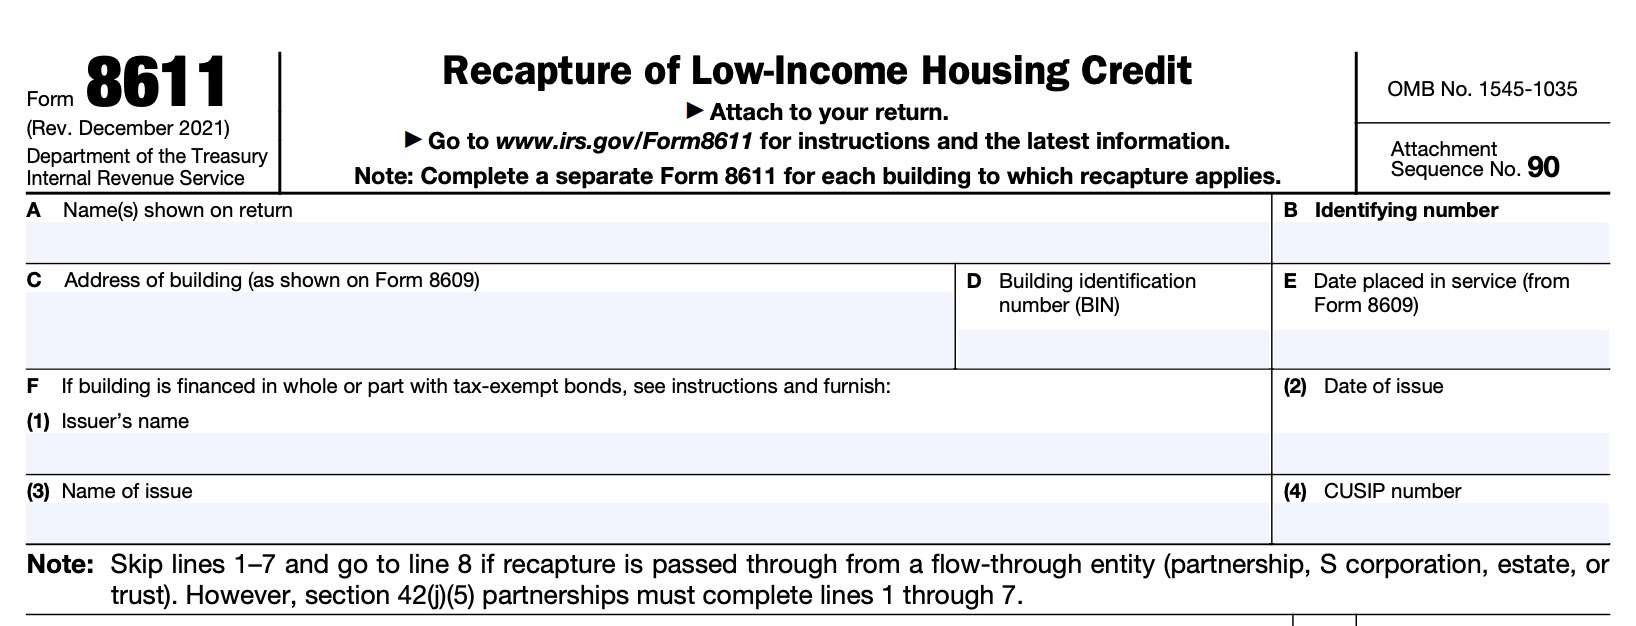 irs form 8611 recapture of low-income housing credit, taxpayer and building information